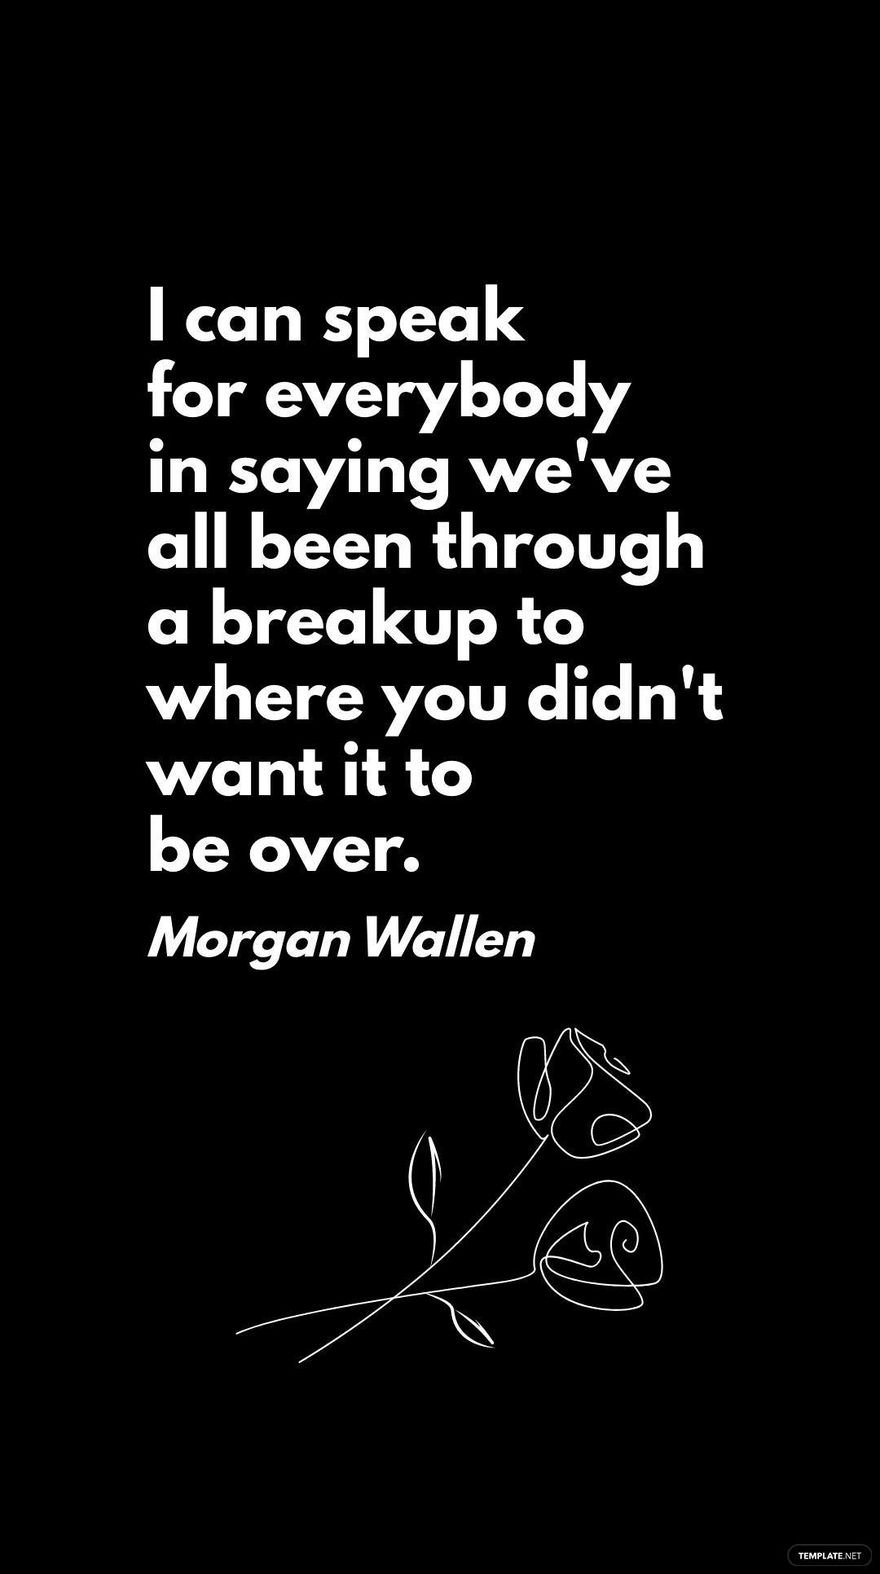 Morgan Wallen - I can speak for everybody in saying we've all been through a breakup to where you didn't want it to be over.